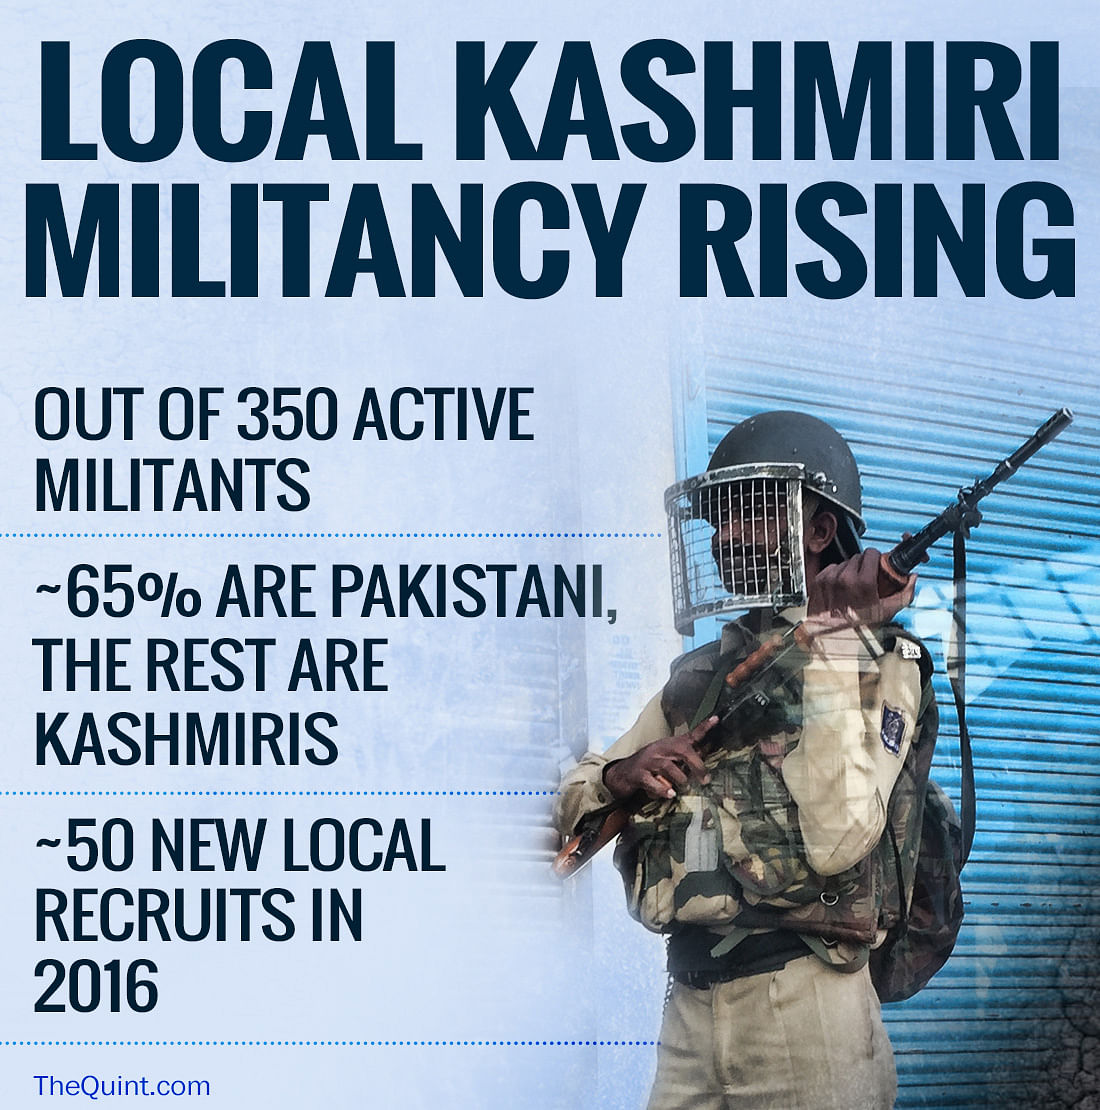 Around 1,800 Over Ground Workers are aiding militants with logistics in Kashmir, say IB sources.